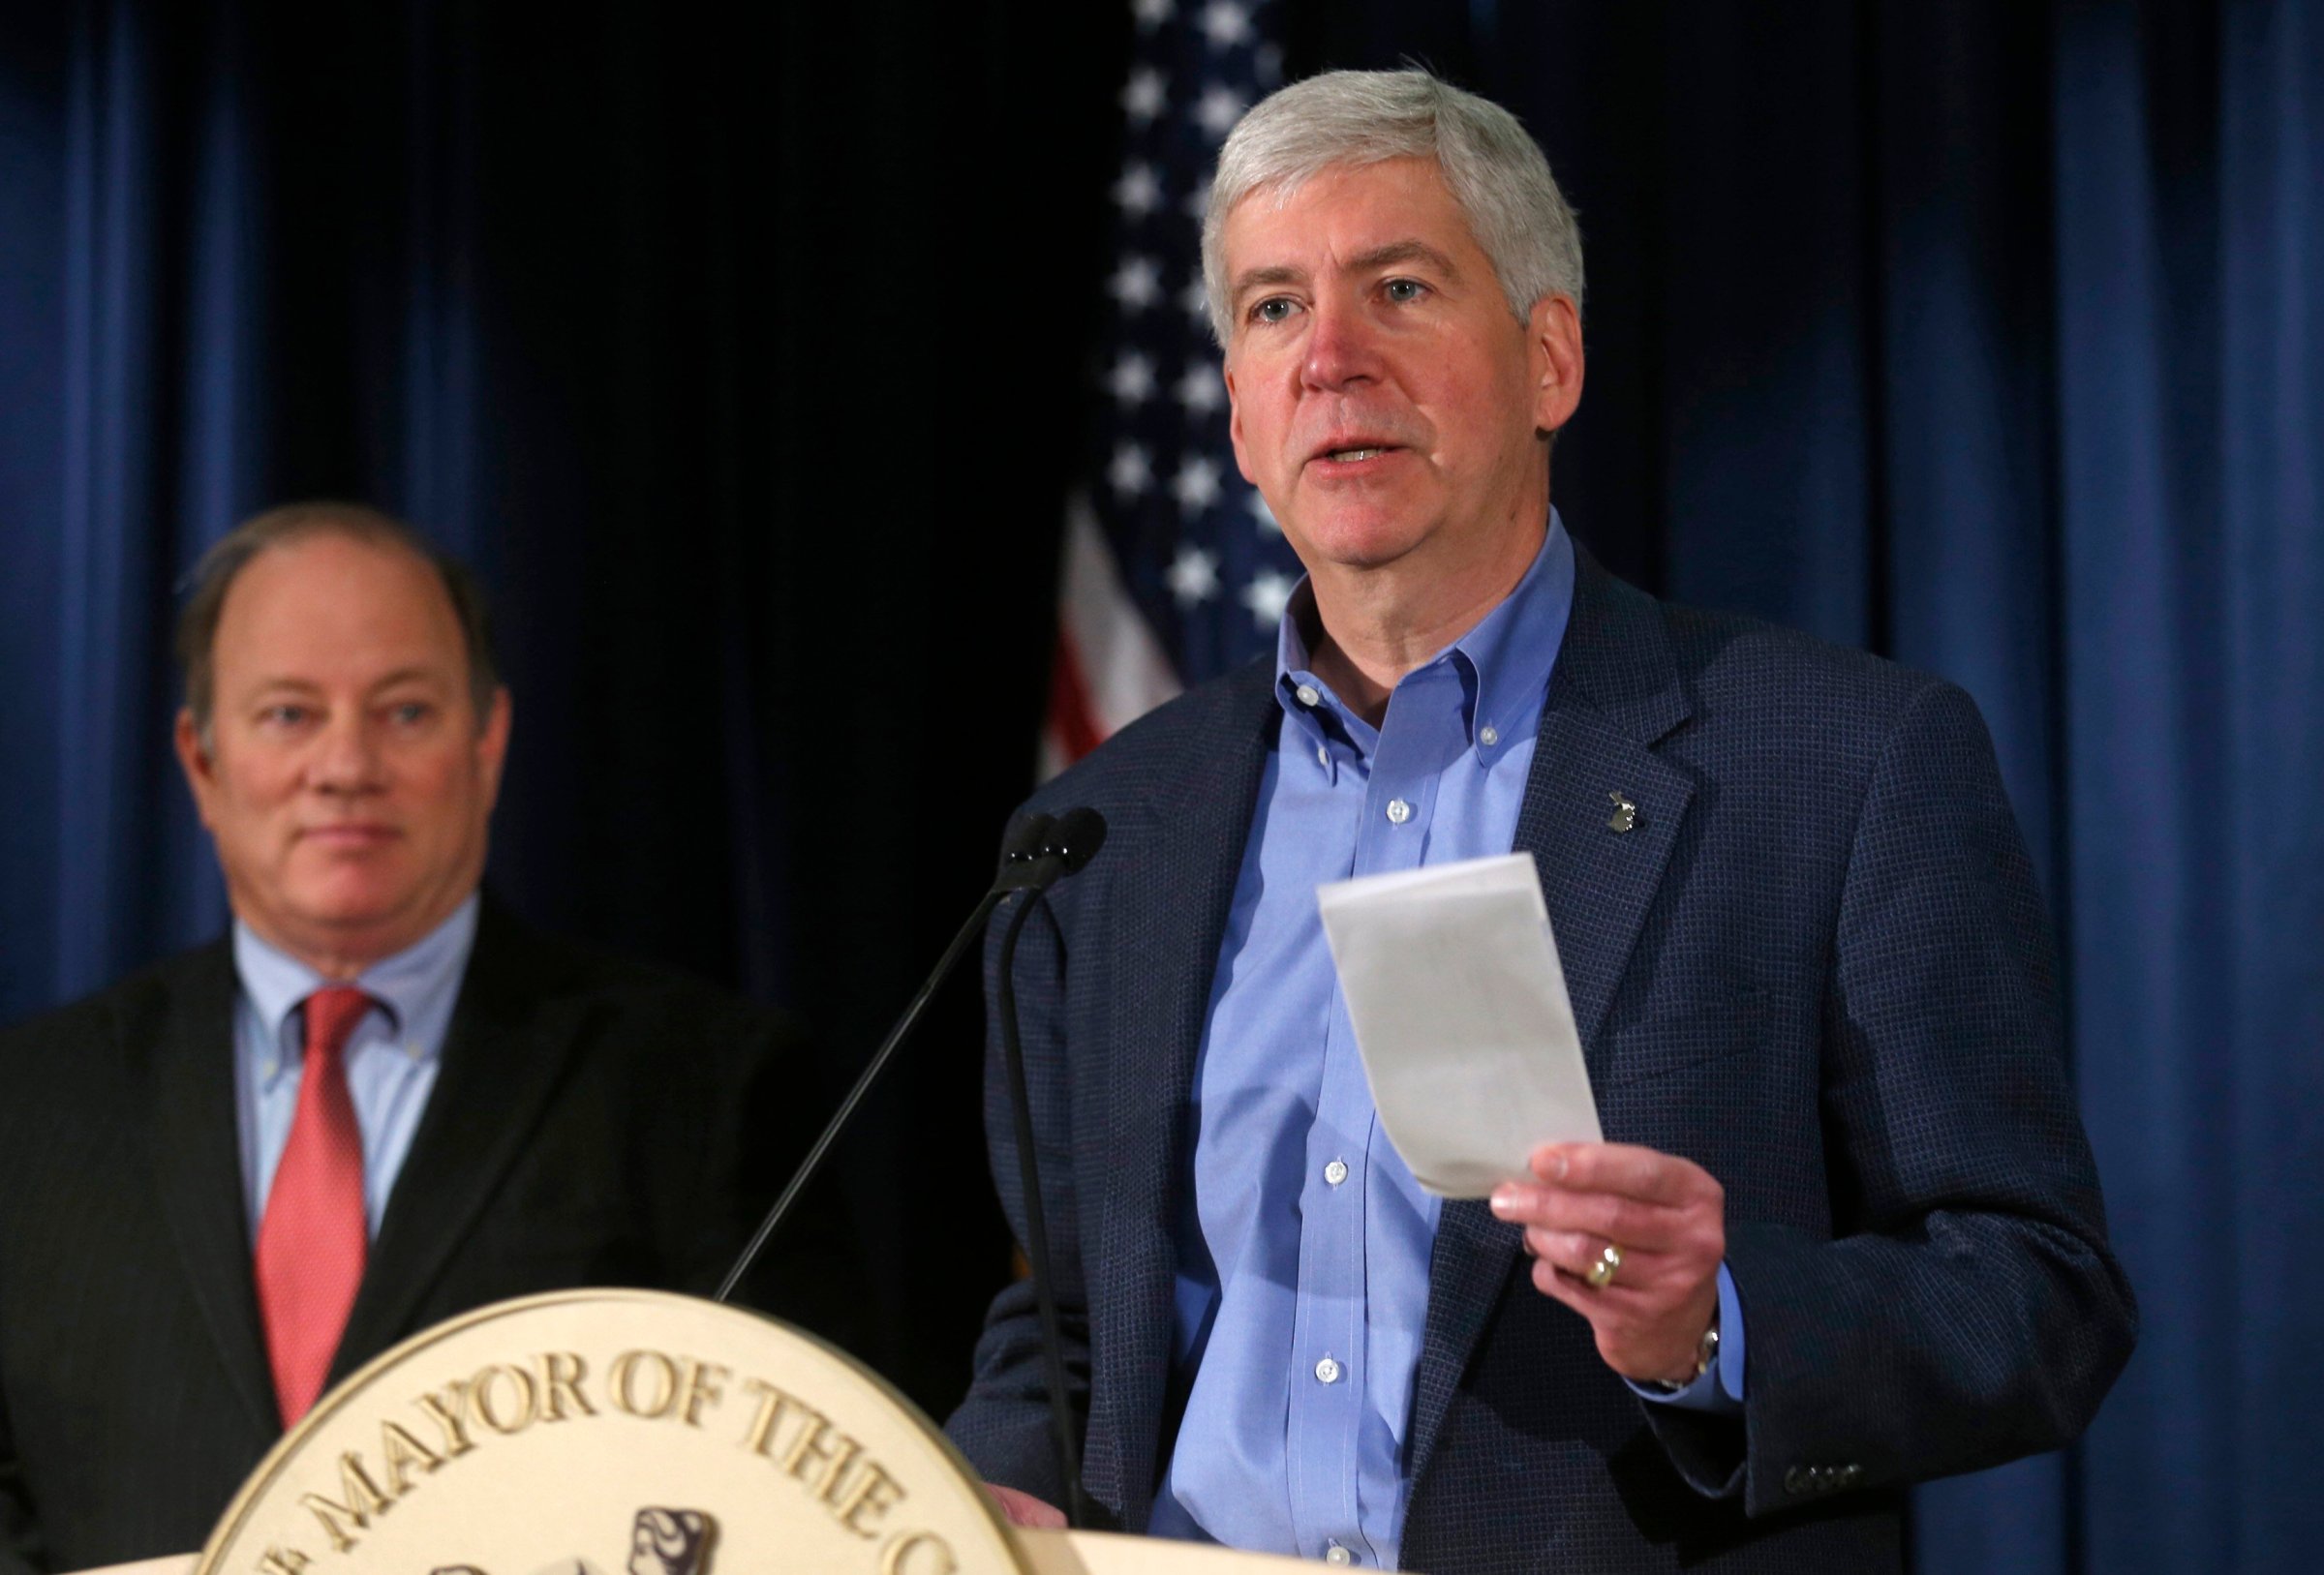 Michigan Governor Rick Snyder holds a rebate check for $1.2 million dollars to hand to Detroit Mayor Mike Duggan during a news conference discussing the city of Detroit exiting from bankruptcy in Detroit